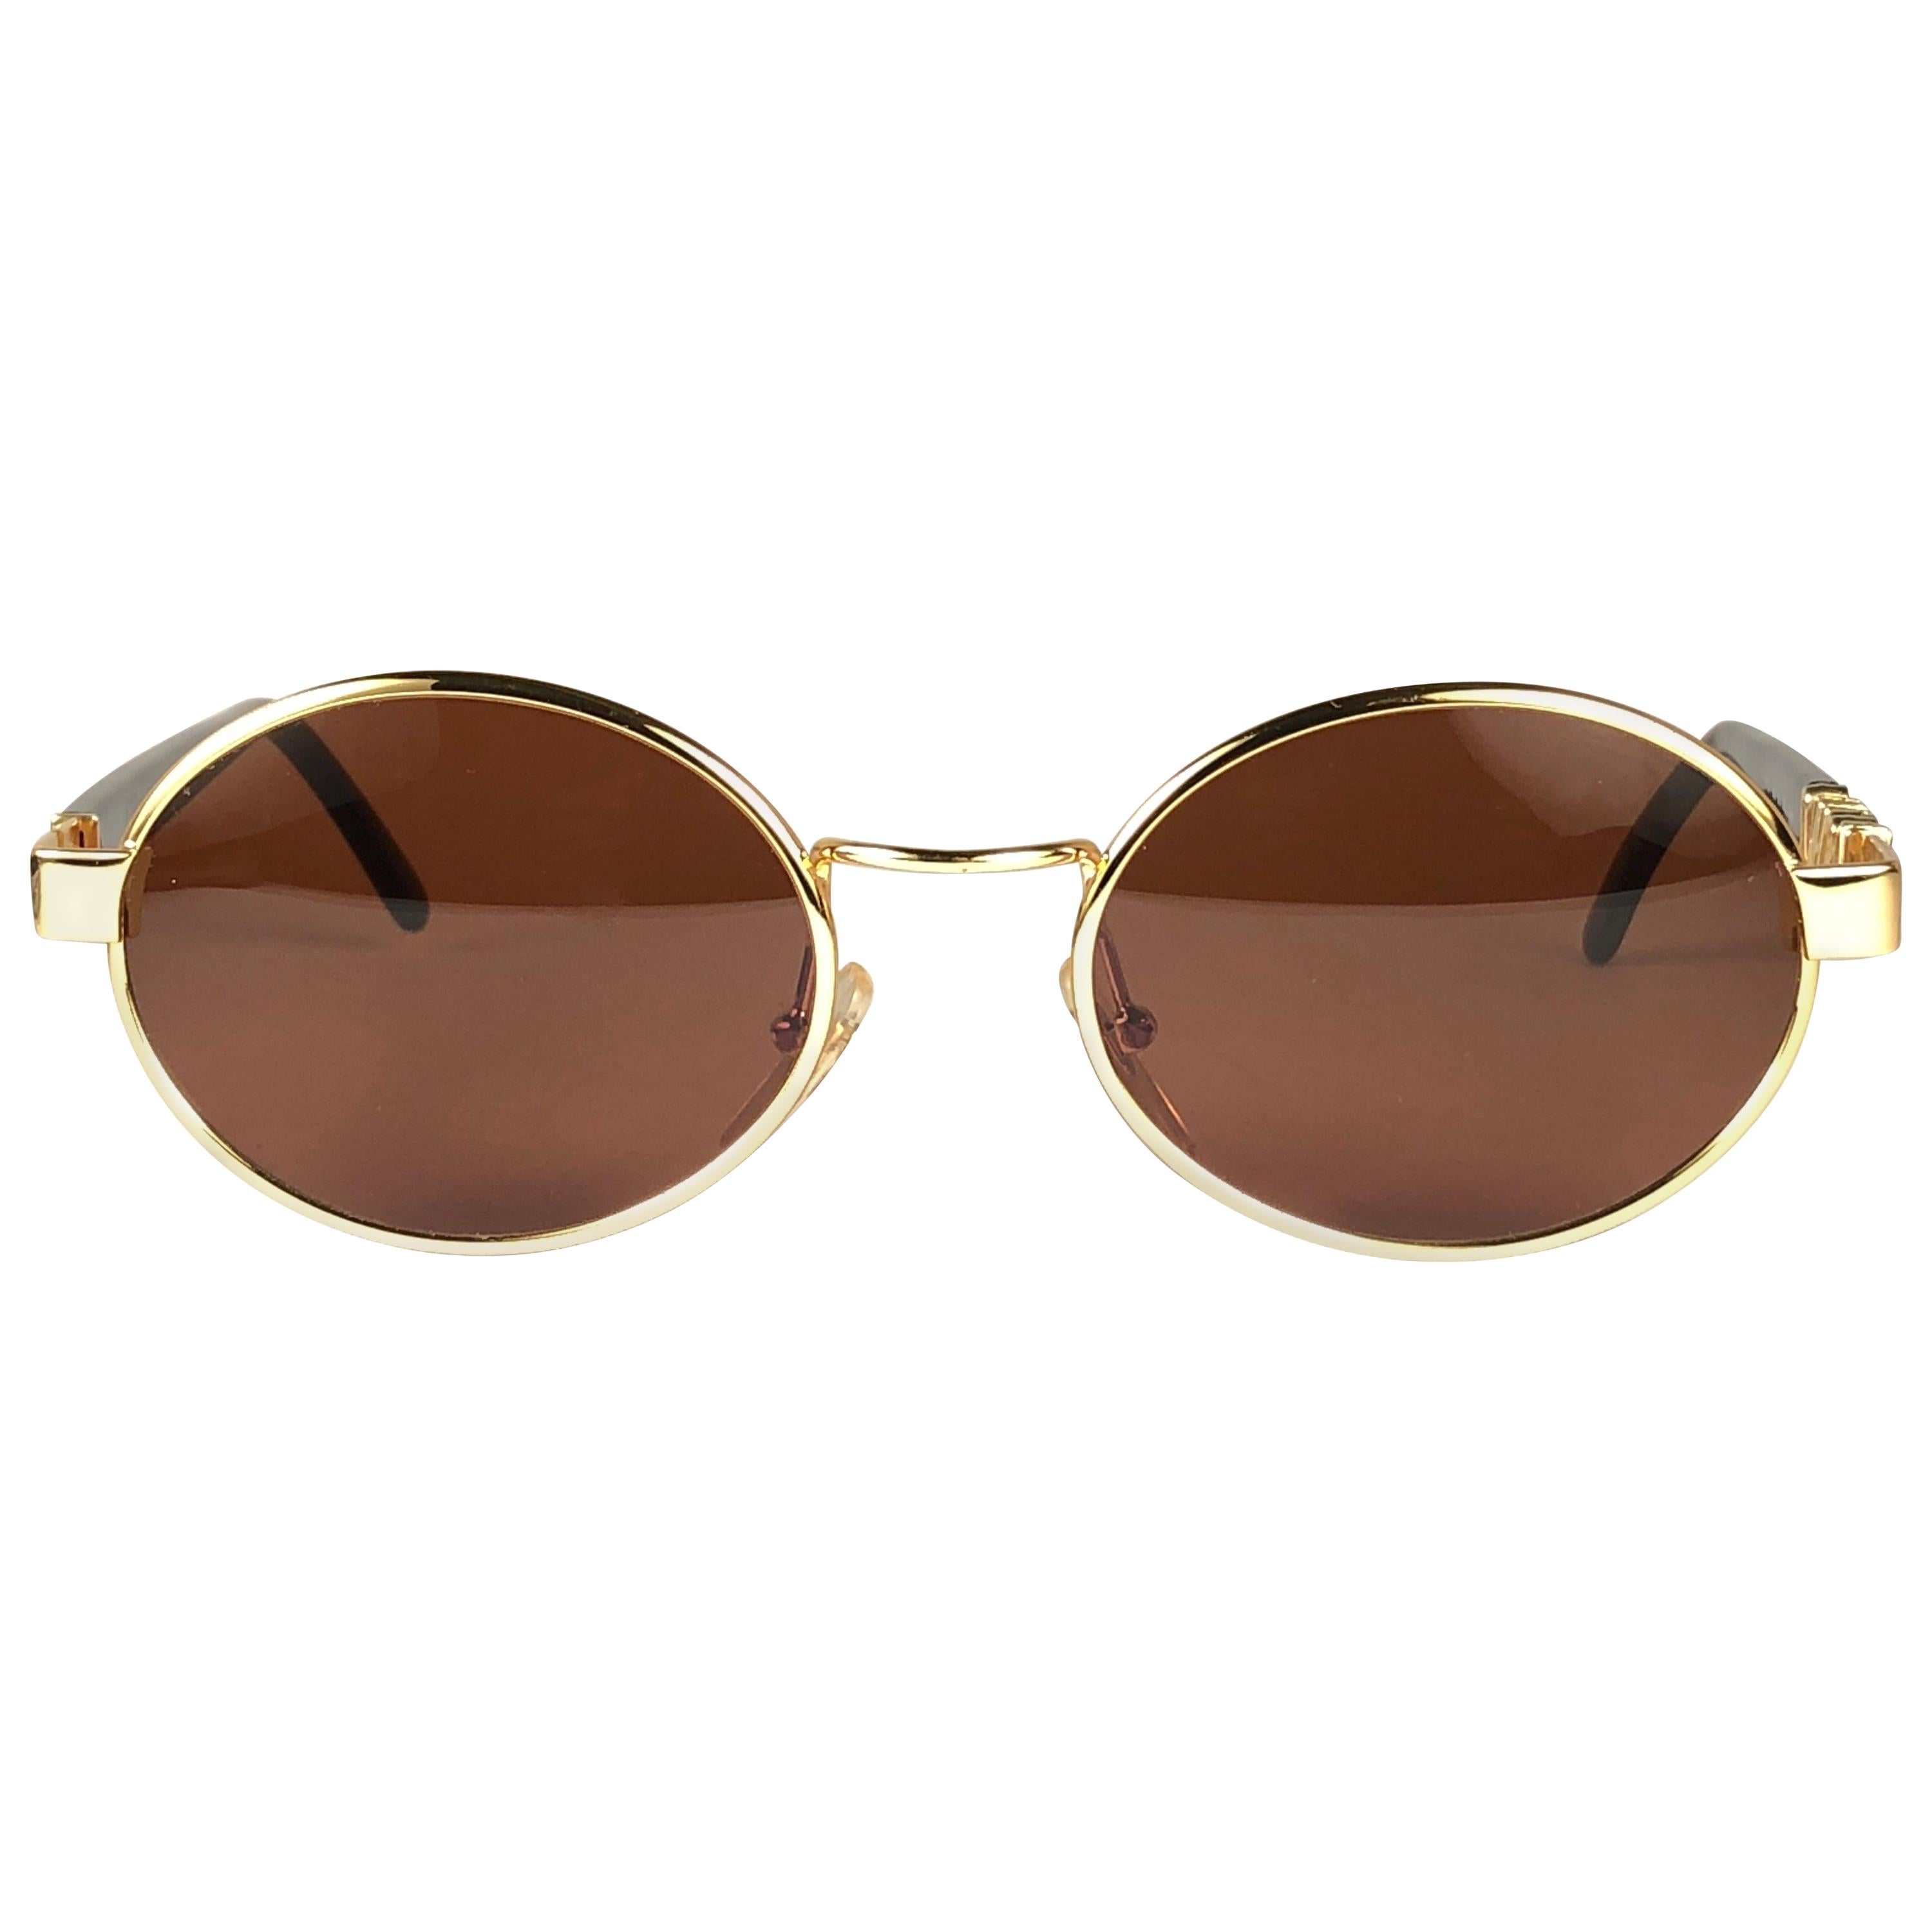 Mint Vintage Moschino Small Oval Gold 1990 Sunglasses Made in Italy